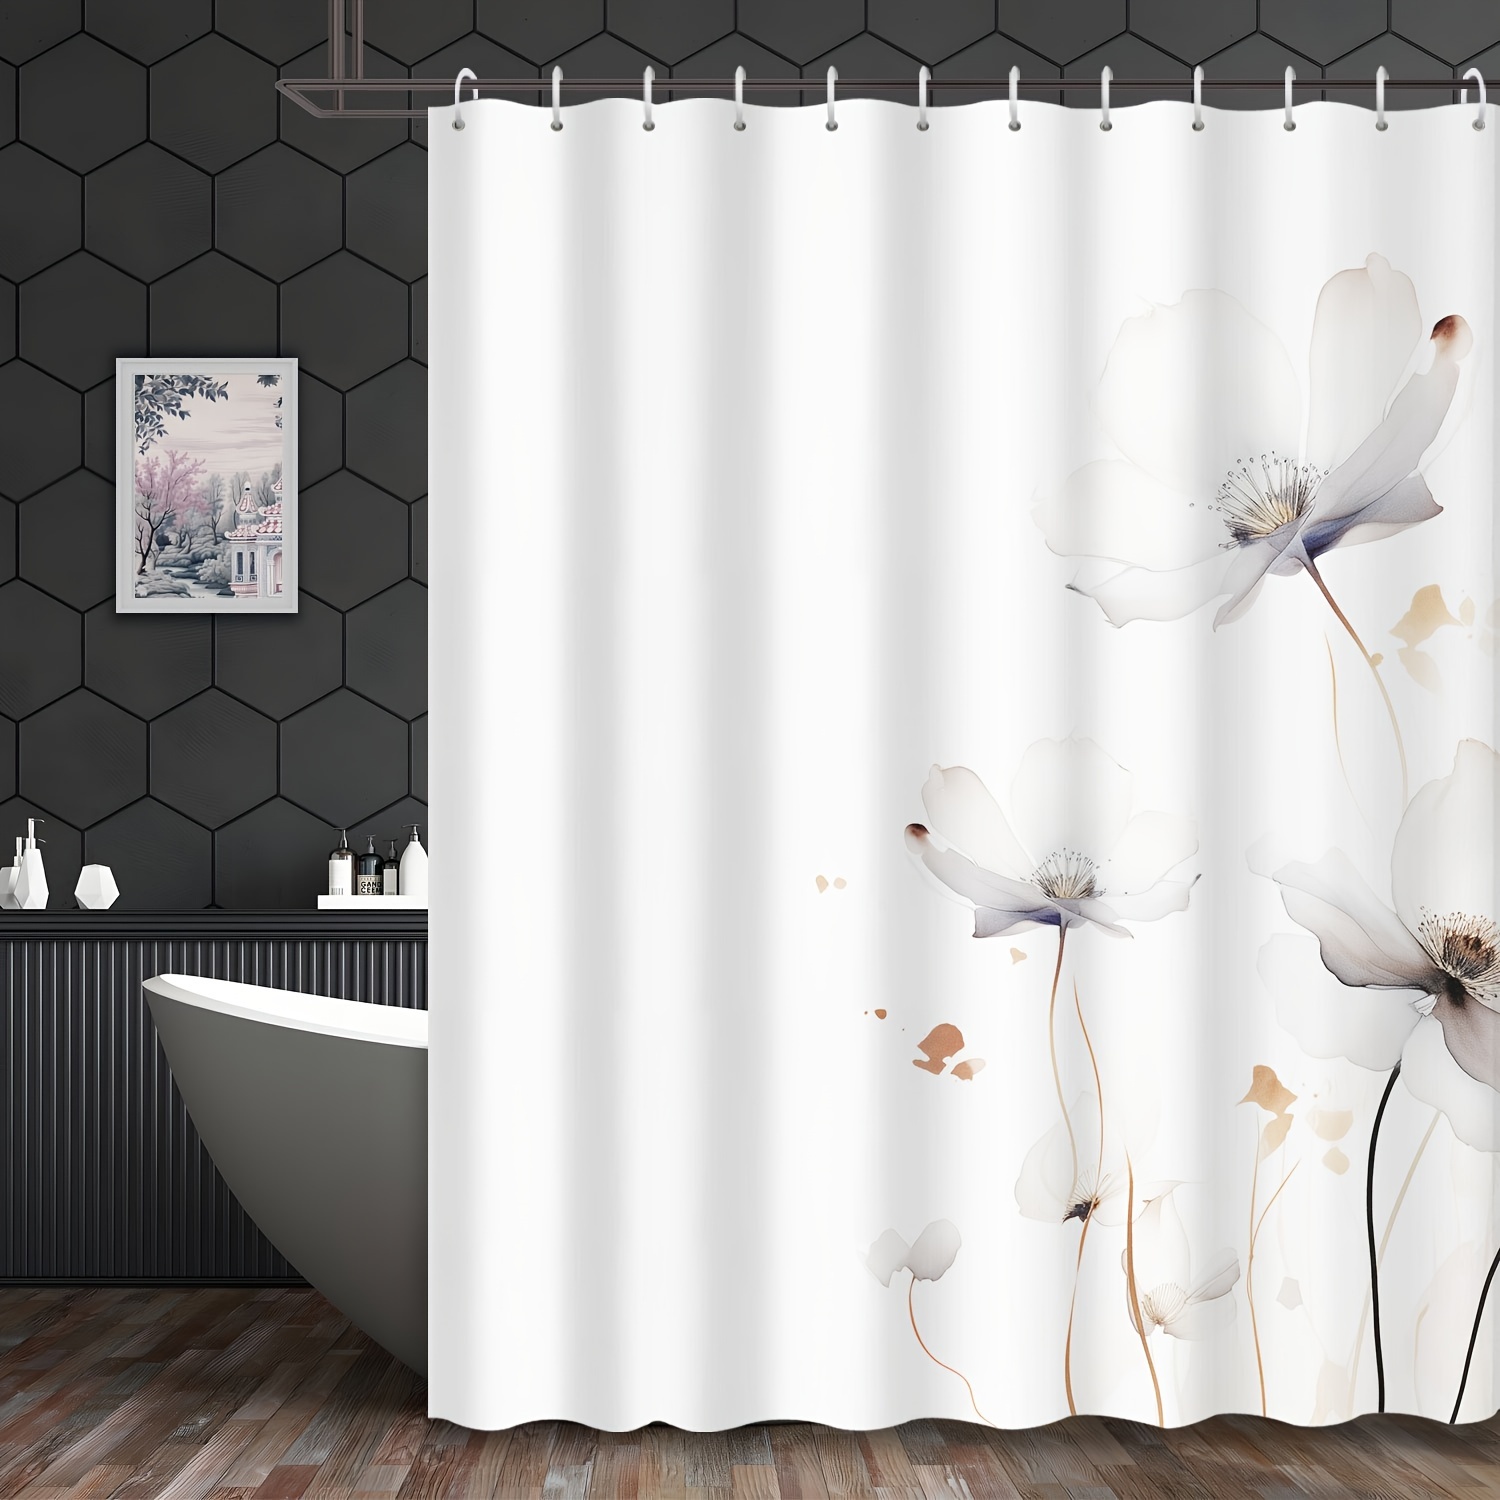 

1pcs Abstract Watercolor Elegant Light Flowers Printed Waterproof Shower Curtain For Hotel Apartment Bathroom Shower Curtain Tapestry Wall Decoration Hanging 72inch*72inch With 12 Hooks